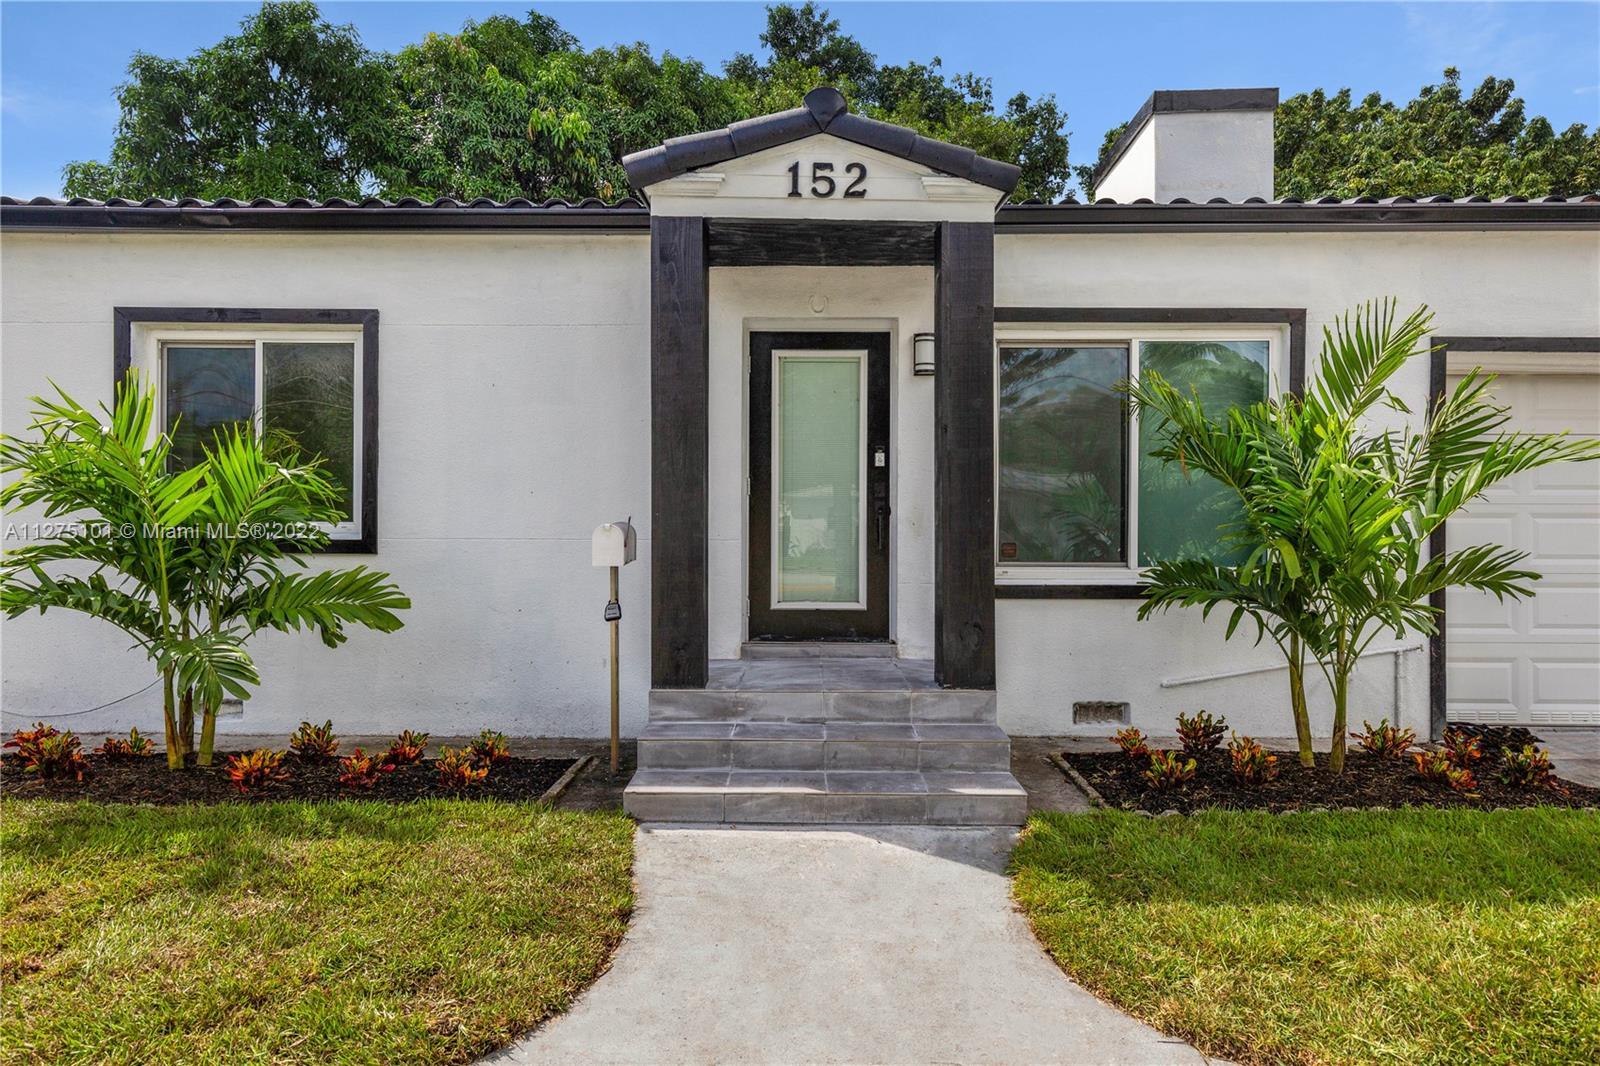 Remodeled Charming 3/2 Miami Shores Single Family Home with Impact Windows all over, lush landscapin